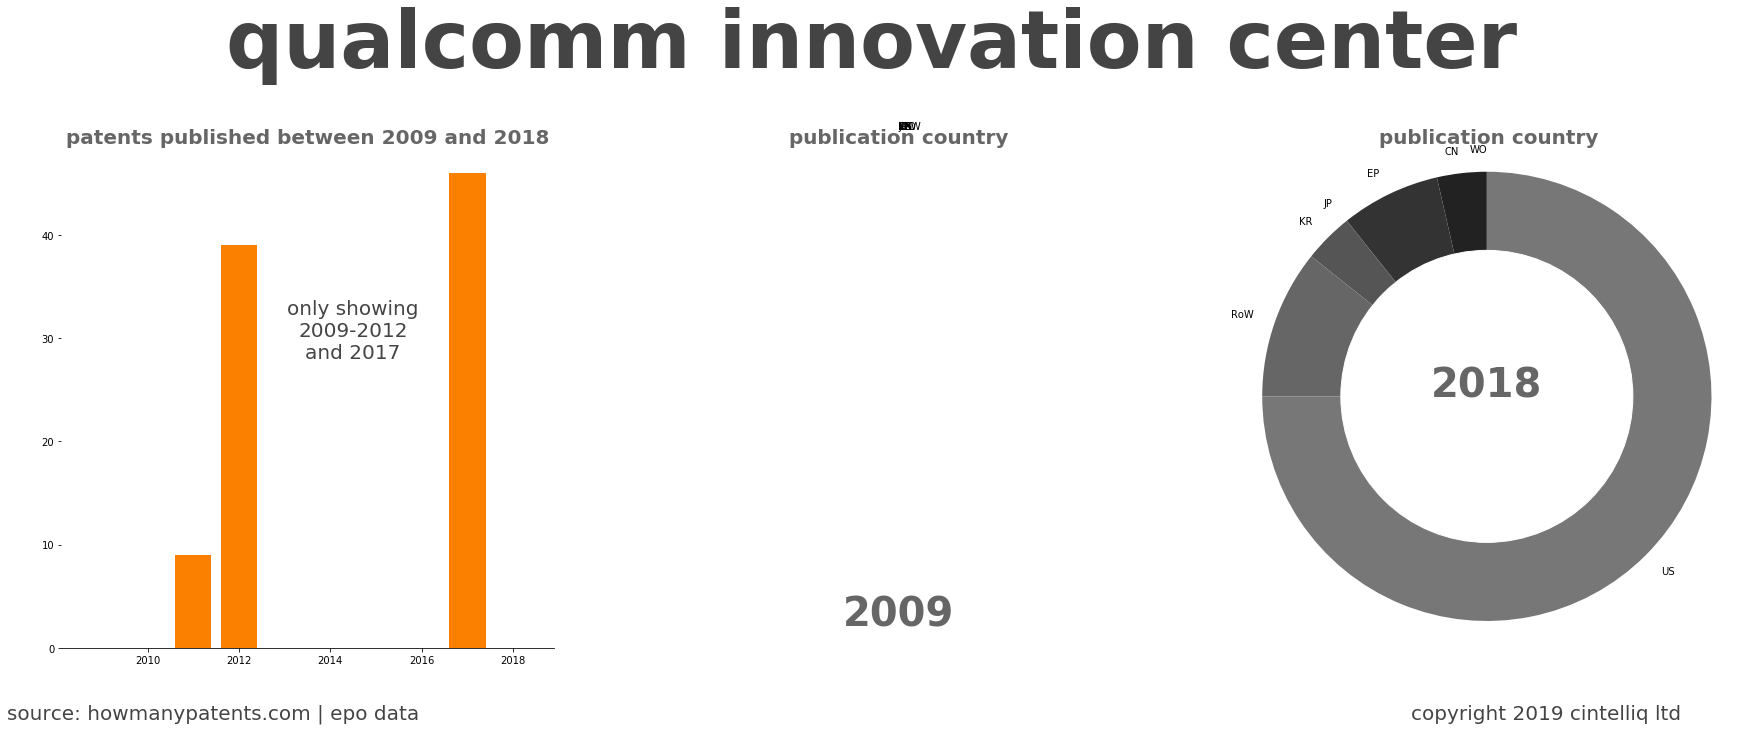 summary of patents for Qualcomm Innovation Center